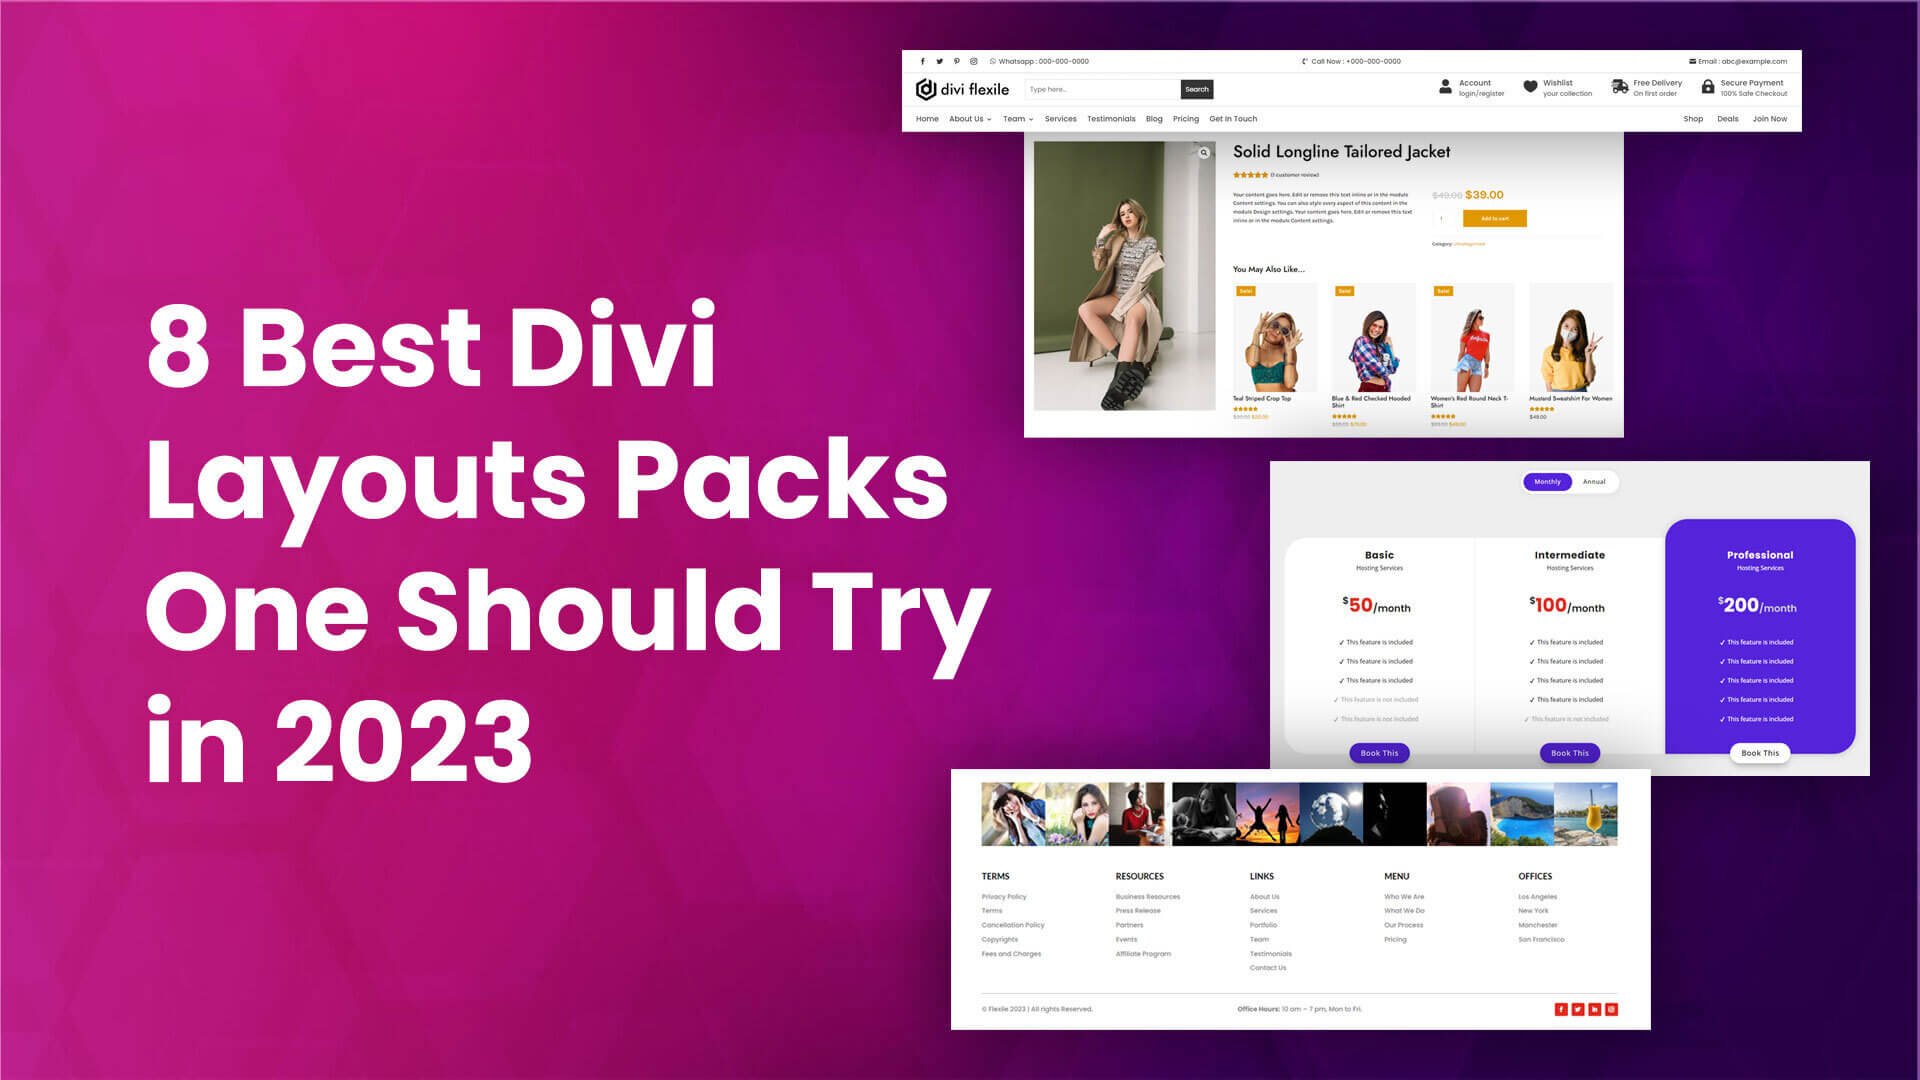 Divi Layouts Packs One Should Try